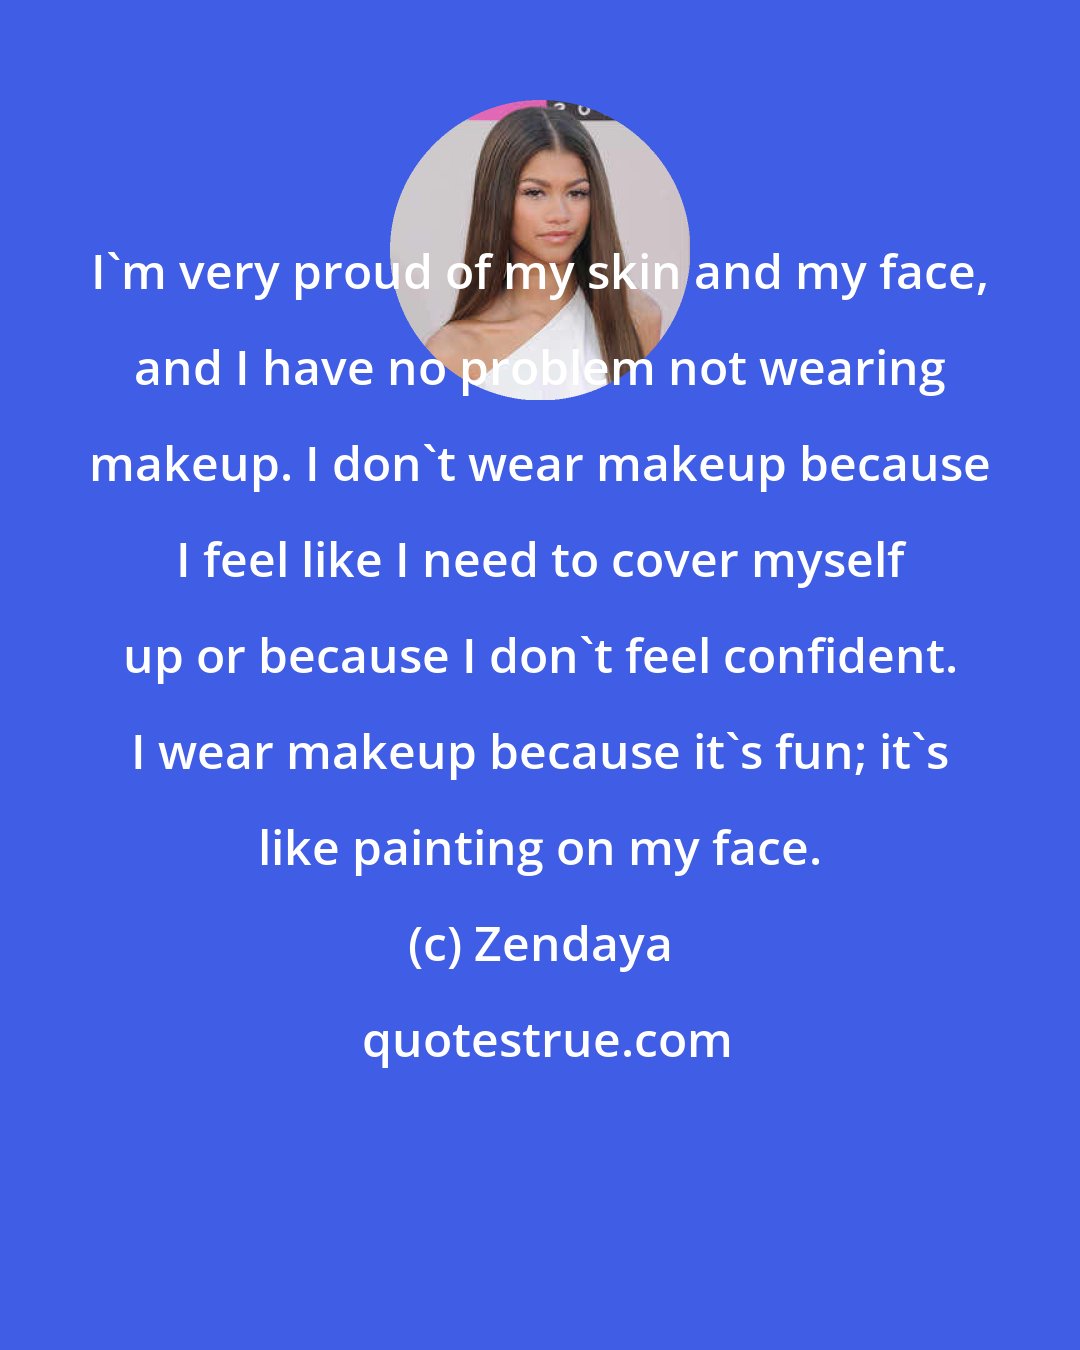 Zendaya: I'm very proud of my skin and my face, and I have no problem not wearing makeup. I don't wear makeup because I feel like I need to cover myself up or because I don't feel confident. I wear makeup because it's fun; it's like painting on my face.